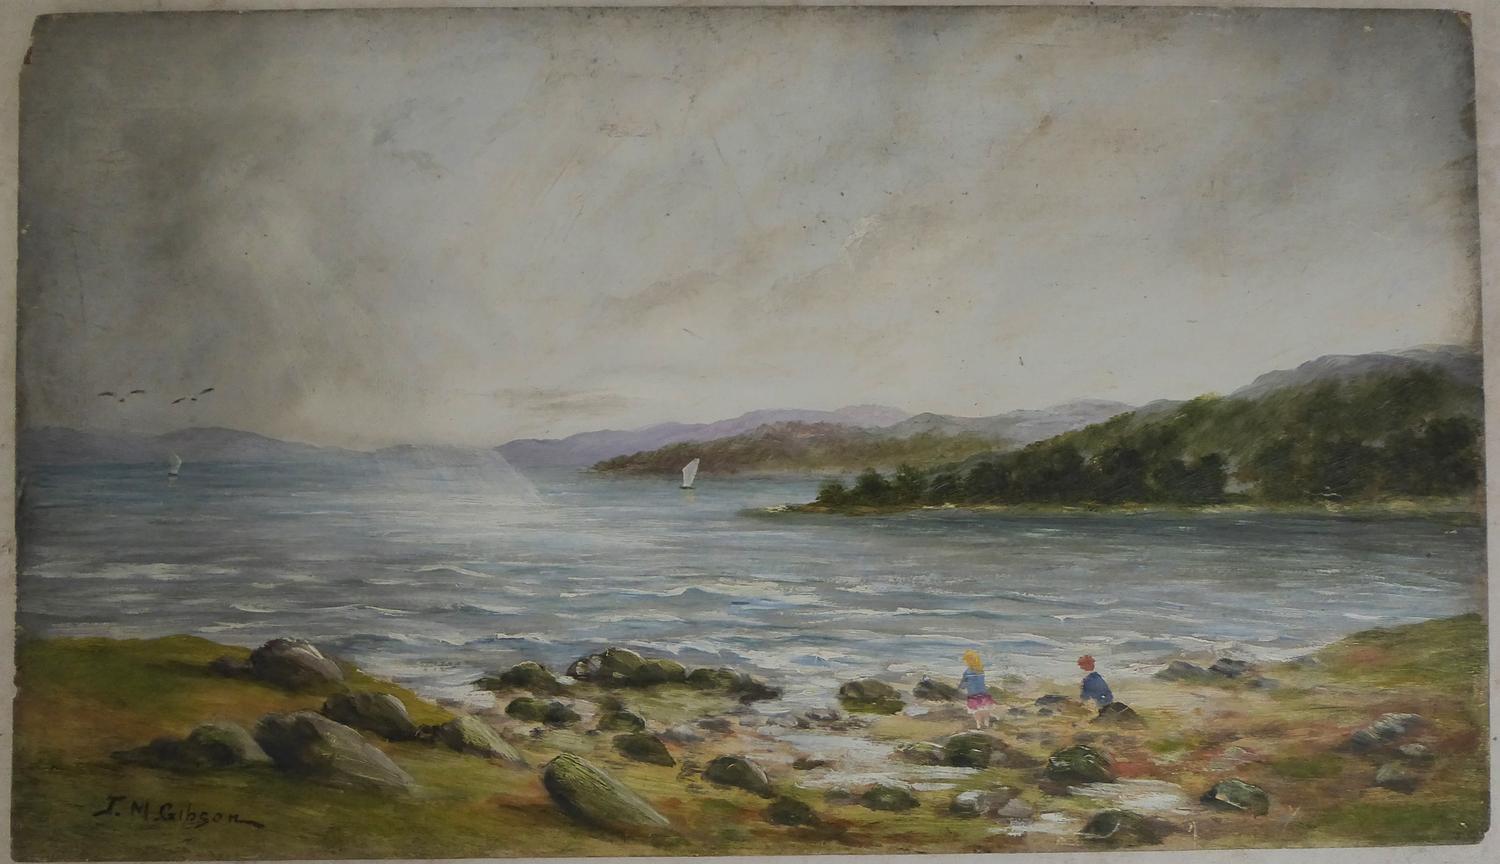 Delightful painting 'Oil on board' - children on the rocky beach at Gareloch, Scotland with a sailing ship in the near distance. 
Signed JM Gibson.
     